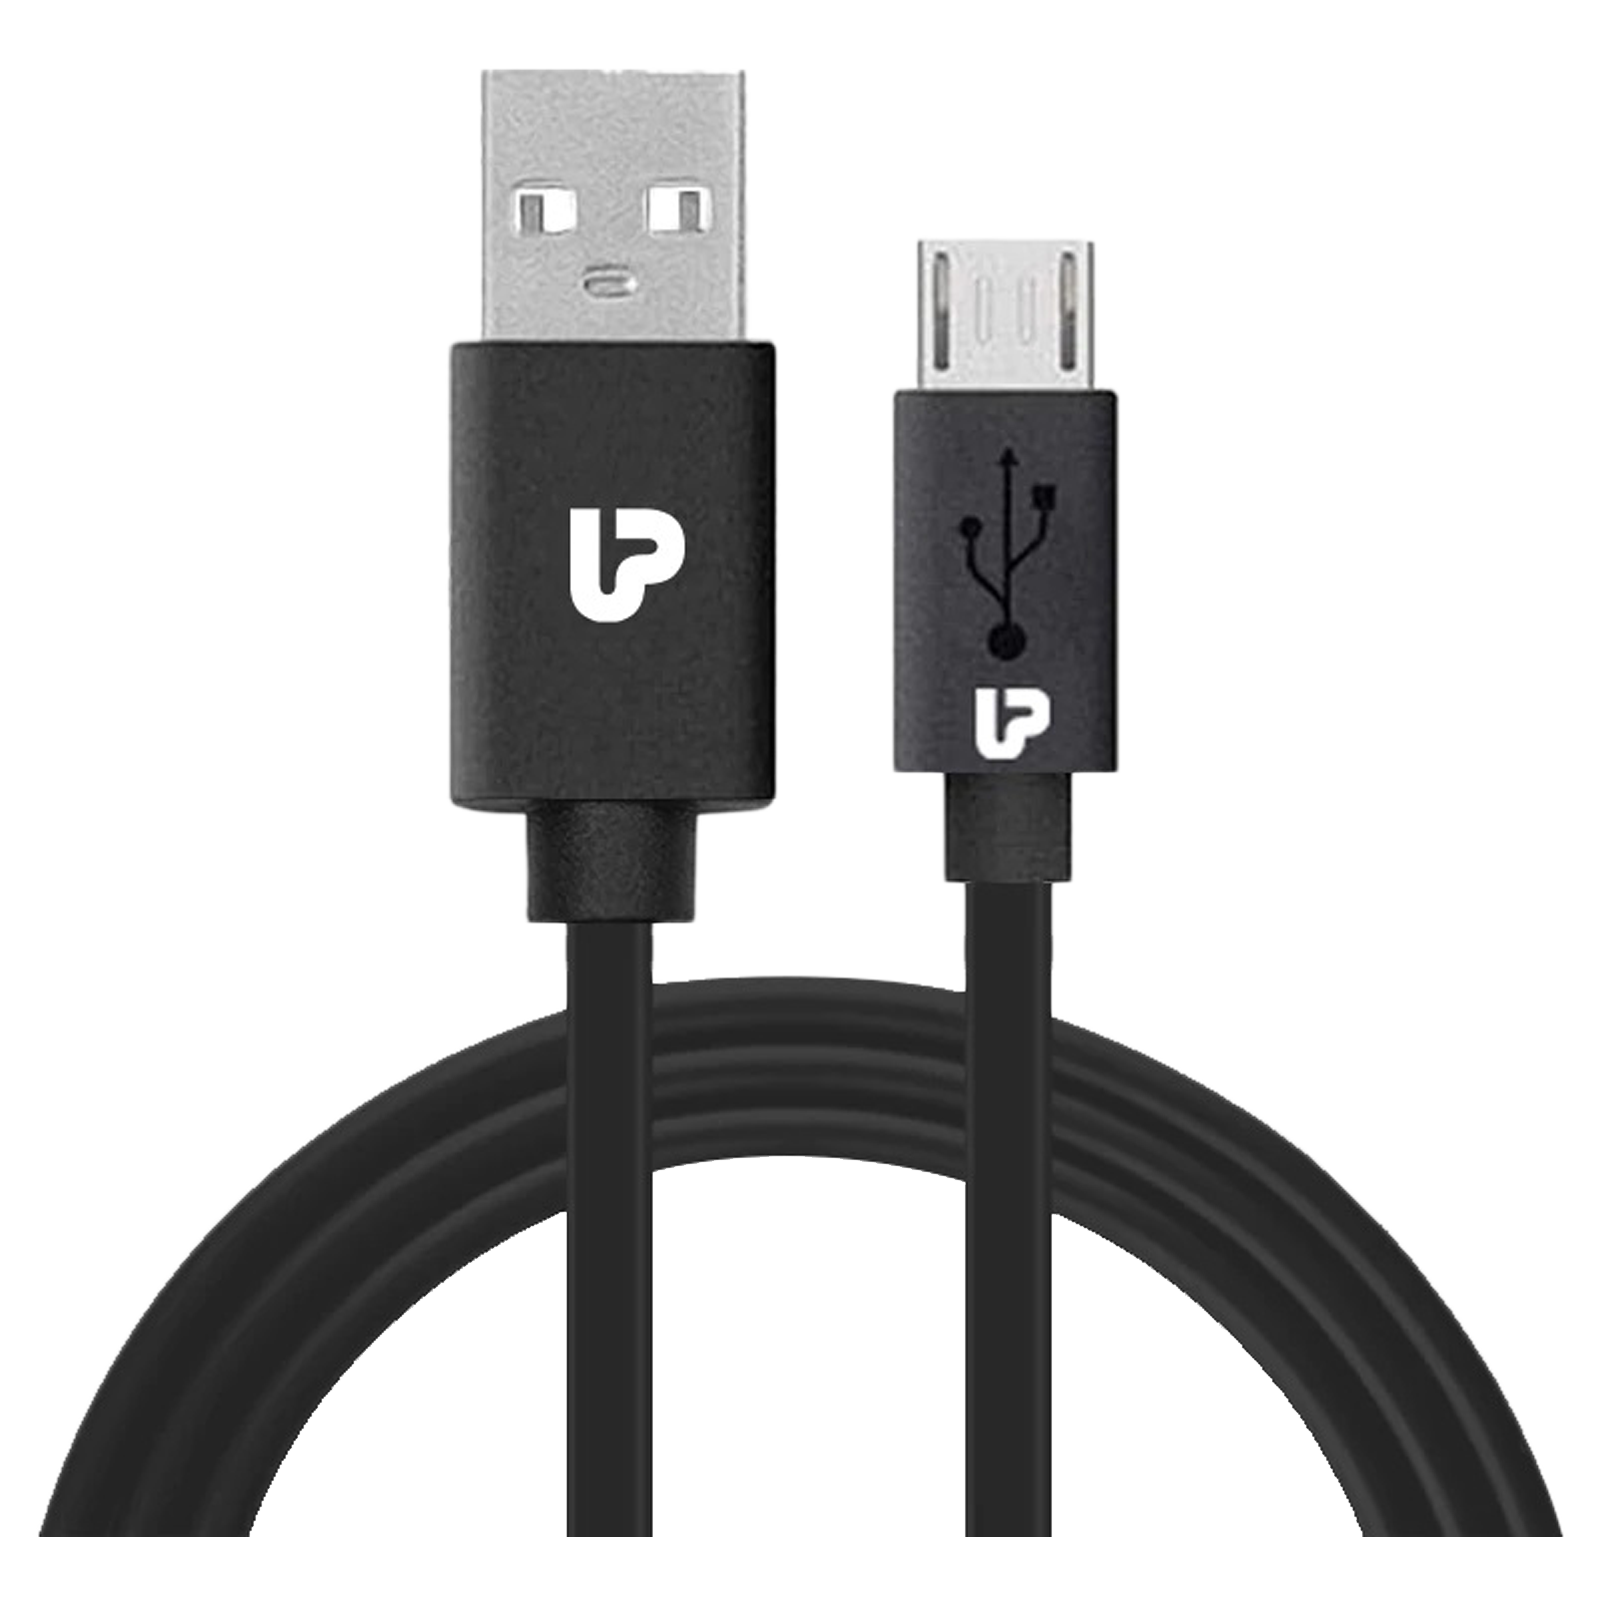 UltraProlink Volo PVC 1 Meter USB Type-A to Micro USB 2.0 Type-B Data Transfer and Power/Charging USB Cable (Fast Charging Compatible, UPL0001BLK-0100, Black)_1